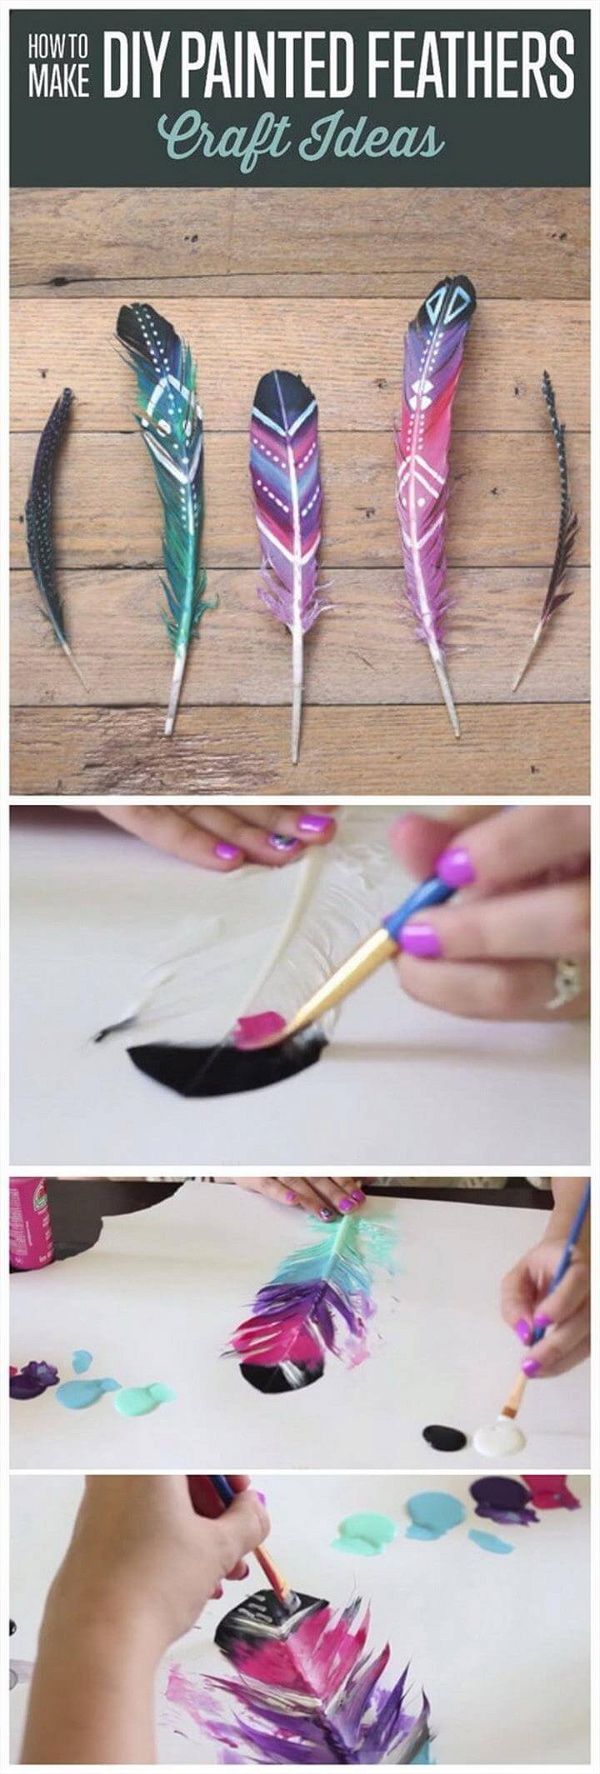 DIY Painted Feathers, Painted Feathers, Fabric Feathers, Dreamcatchers, Fun Crafts, Nature Crafts, Arts And Crafts, Crafts For Kids, Feather Painting, Feather Art, Feather Art, Fun Crafts For Teens, Diy Projects For Kids, Diy For Girls, Art Projects, Weekend Crafts, Diy Painting, Feather Painting, Feather Art, Painted Feathers, Bedroom Decor For Teen Girls Diy, Fall Crafts, Nature Crafts, Diy Crafts, Holiday Crafts, Crafts For Kids, Arts And Crafts, Feather Painting, Feather Art, Diy Painting, Feather Hair Pieces, Feather Jewelry, Painted Feathers, Bird Feathers, Feather Painting, Feather Art, Diy Painting, Crafts To Do, Arts And Crafts, Craft Ideas For Teen Girls, Teen Girl Crafts, Quick And Easy Crafts, Diy Arts And Crafts, Crafts To Do, Easy Craft Projects, Art Projects, Feather Crafts, Feather Art, Feather Painting, Painted Feathers, Teen Diy, Teen Arts And Crafts, Craft Ideas For Adults, Diy Crafts For Teens, Activites For Teens, Diy Teen Projects, Feather Crafts, Feather Mobile, Tribal Feather, Feather Wall Decor, Feather Headdress, Crafts With Feathers, Feather Design, Feather Garland,